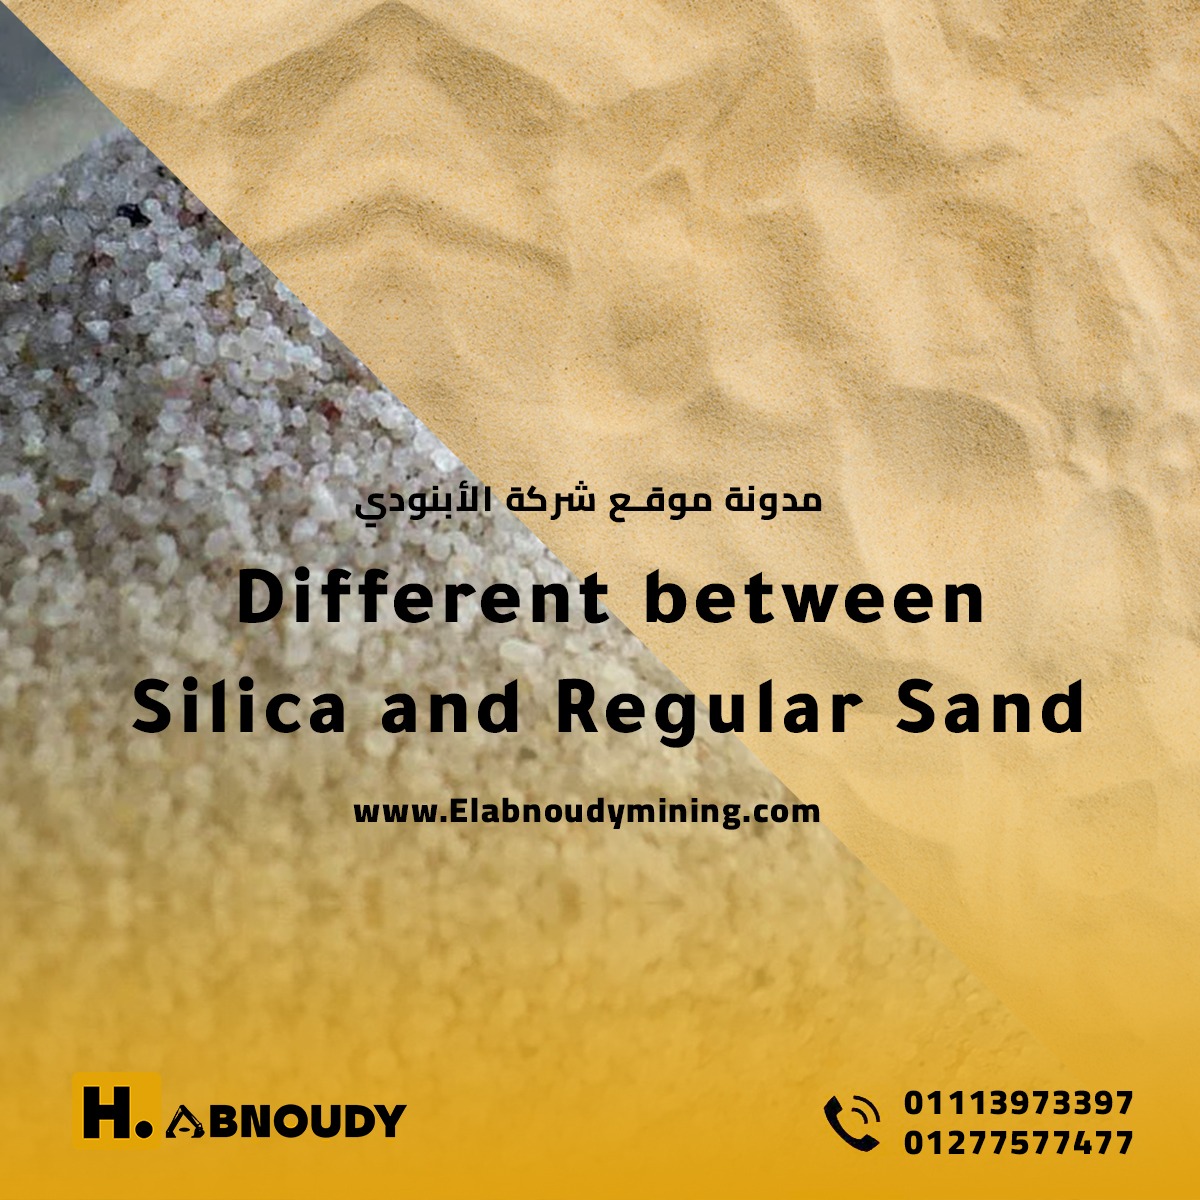 Different between Silica and Regular Sand